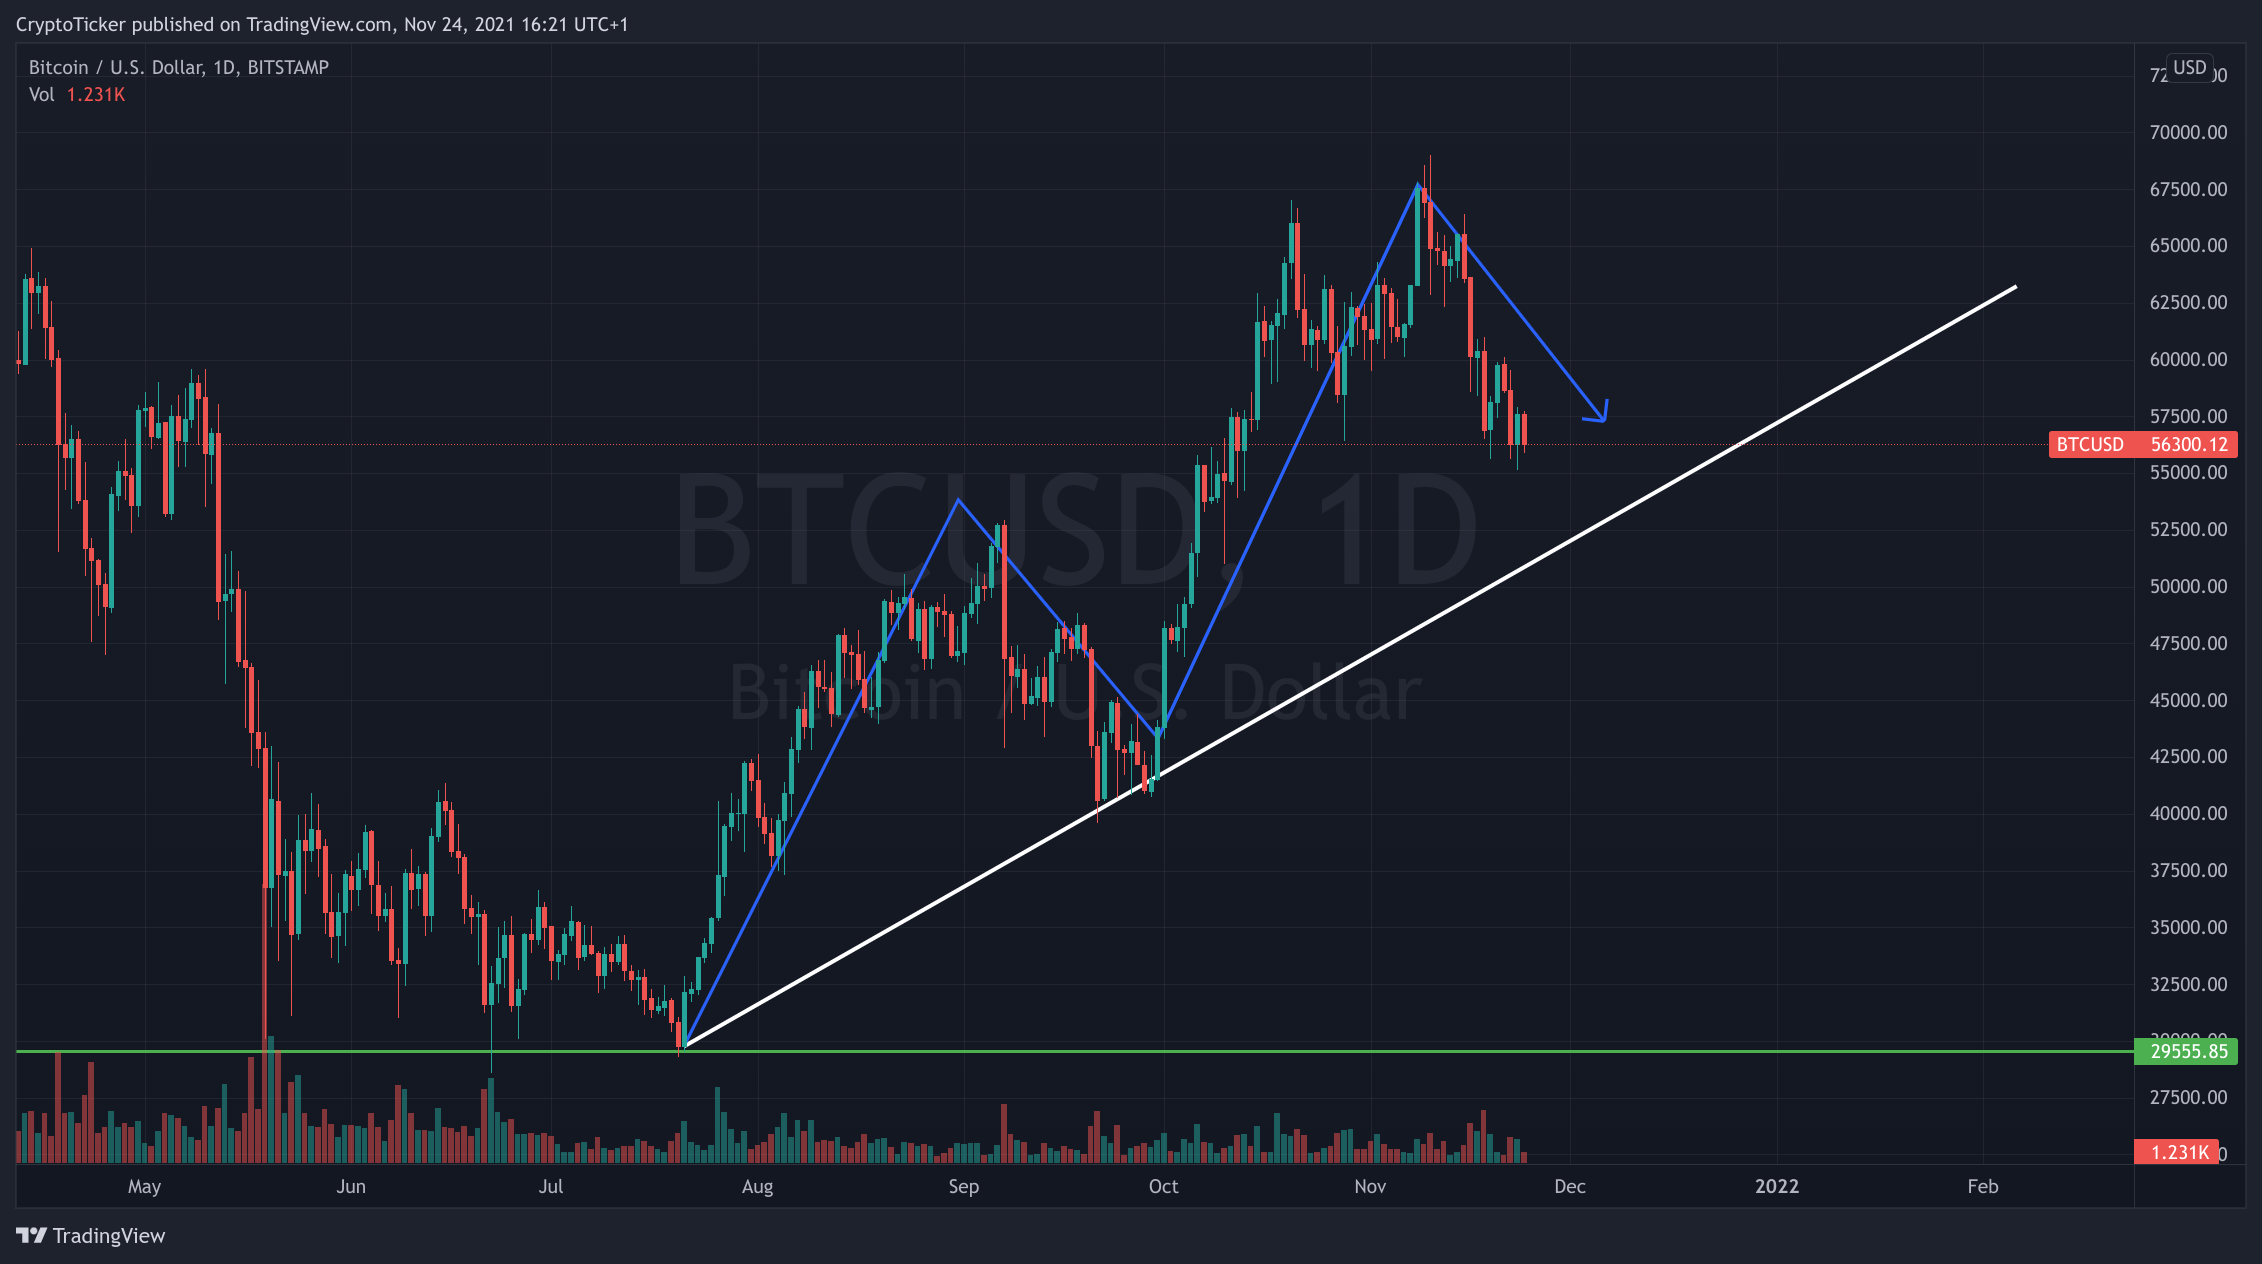 BTC/USD 1-day chart showing the normal uptrend of BTC